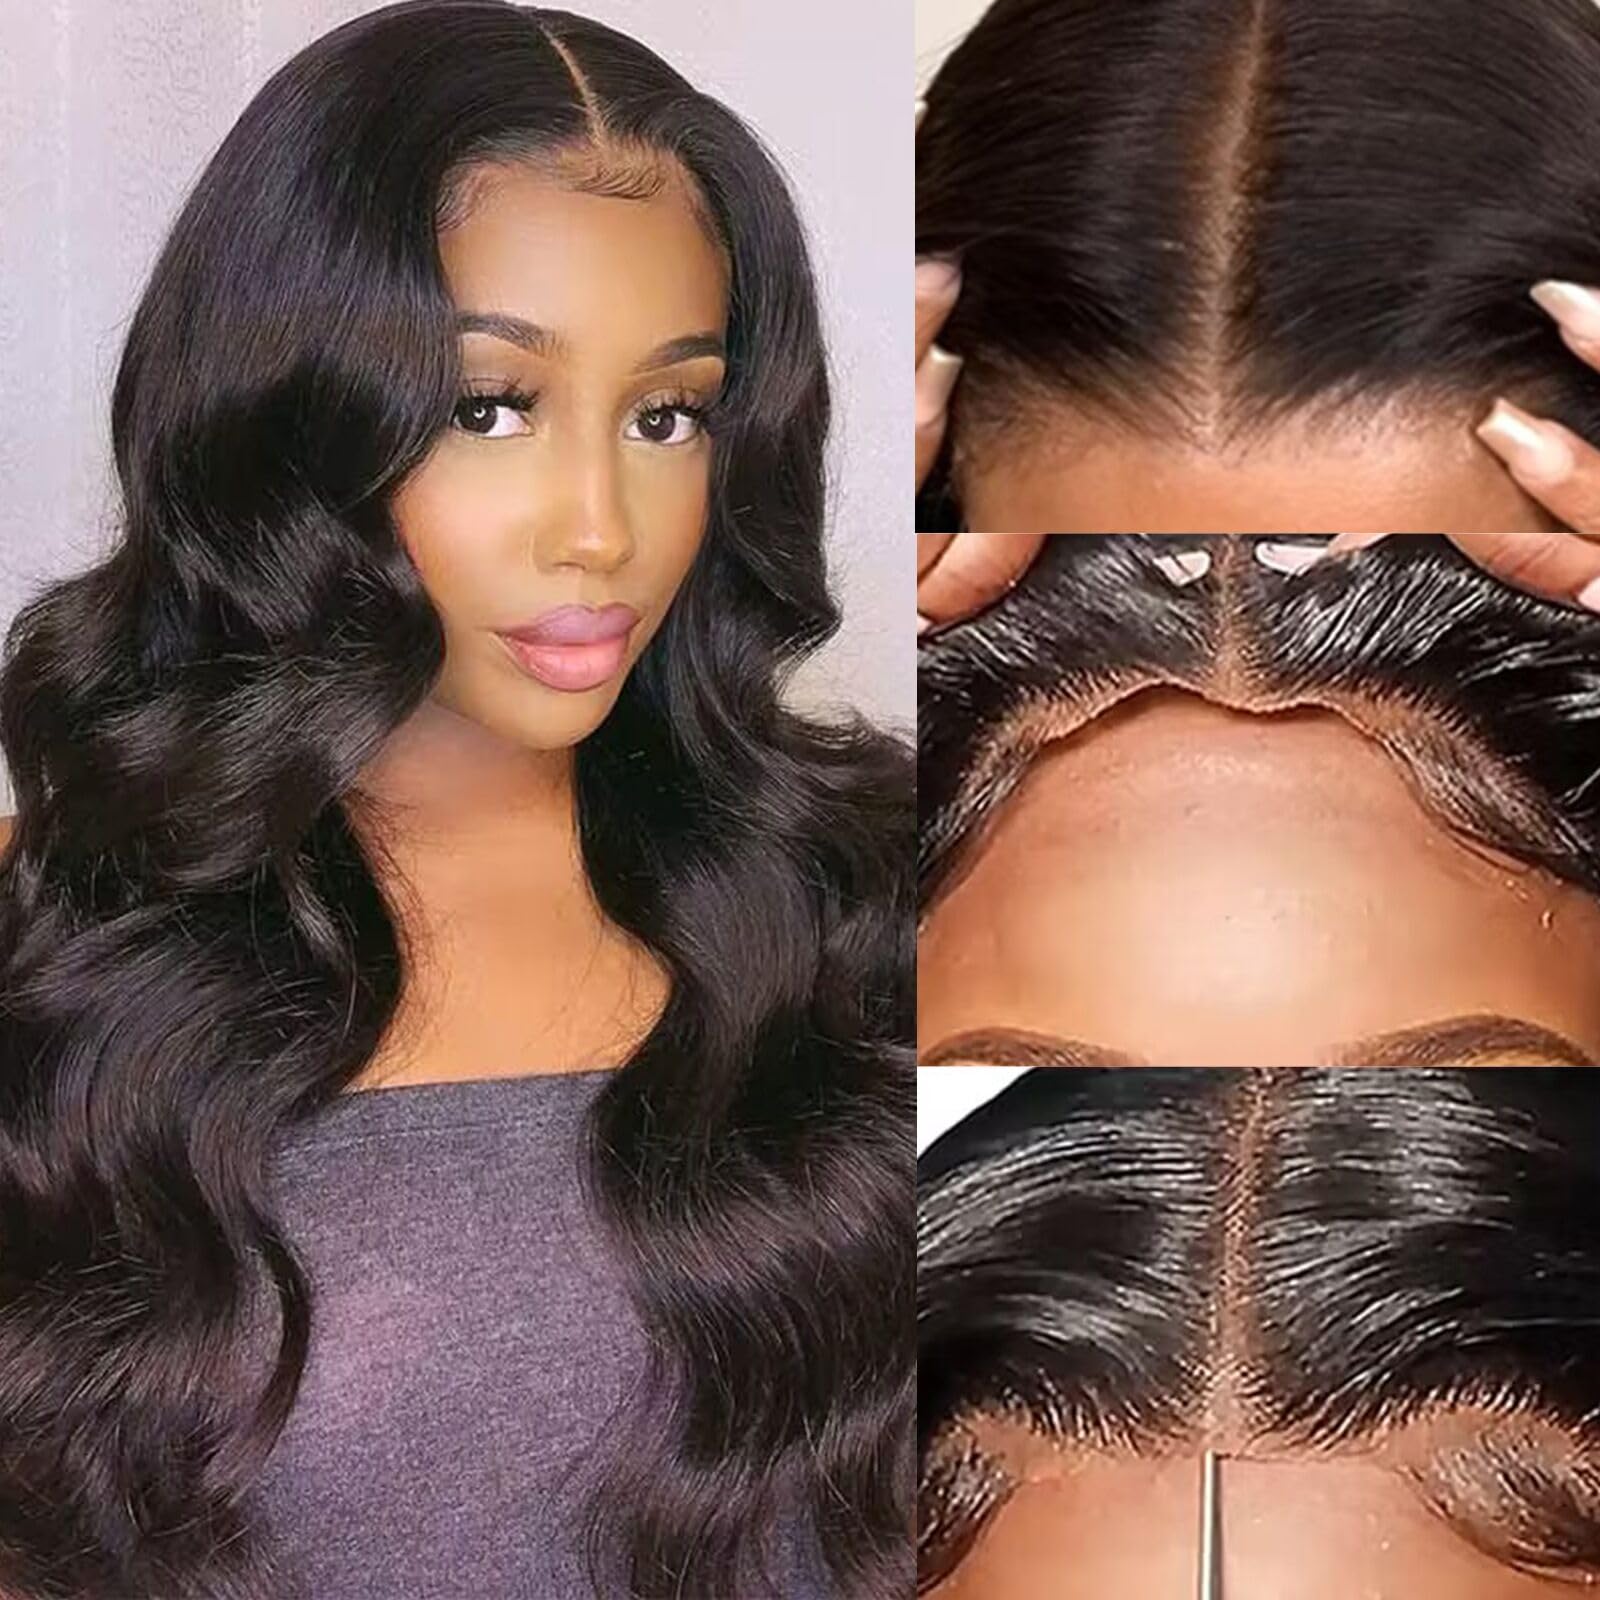 Wear and Go Glueless Wig for Beginners 13x4 Hd Lace Closure Wigs Human –  LIBEAUTY HAIR